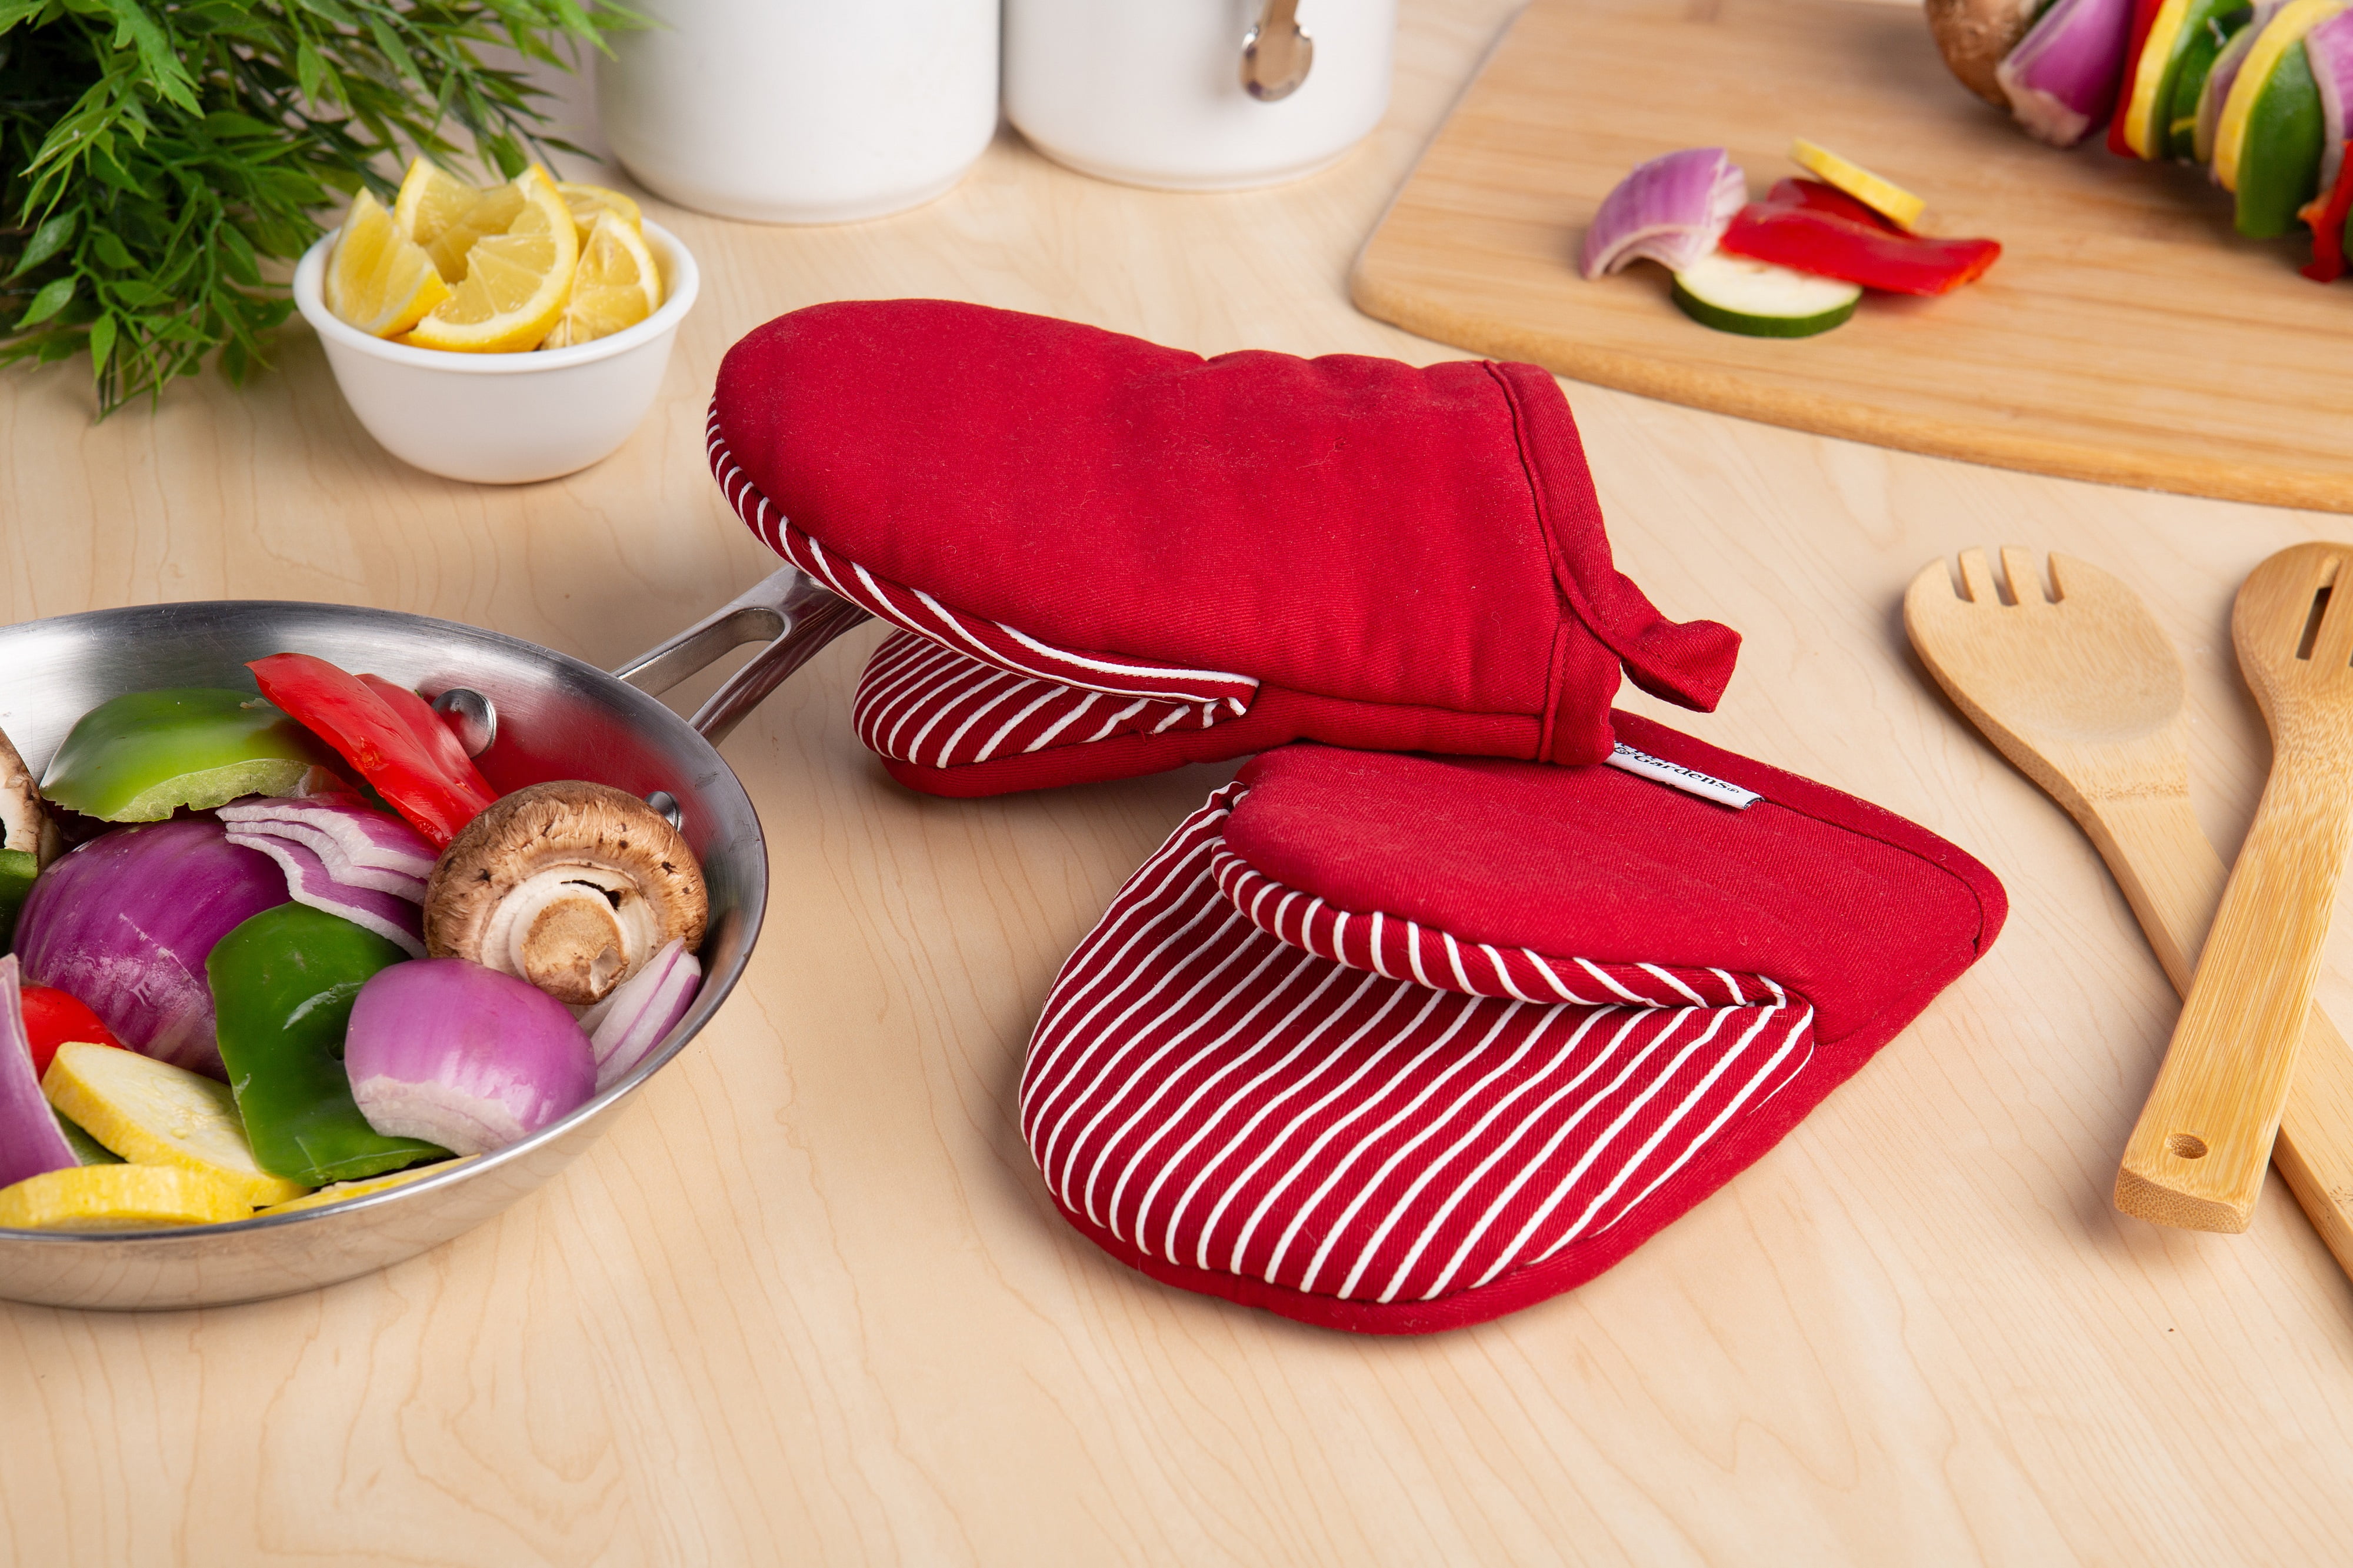 Town & Country Living Martha Stewart Mini Oven Mitts, 5.5-Inch x 8-Inch,  2-Count (Red and Green Plaid)